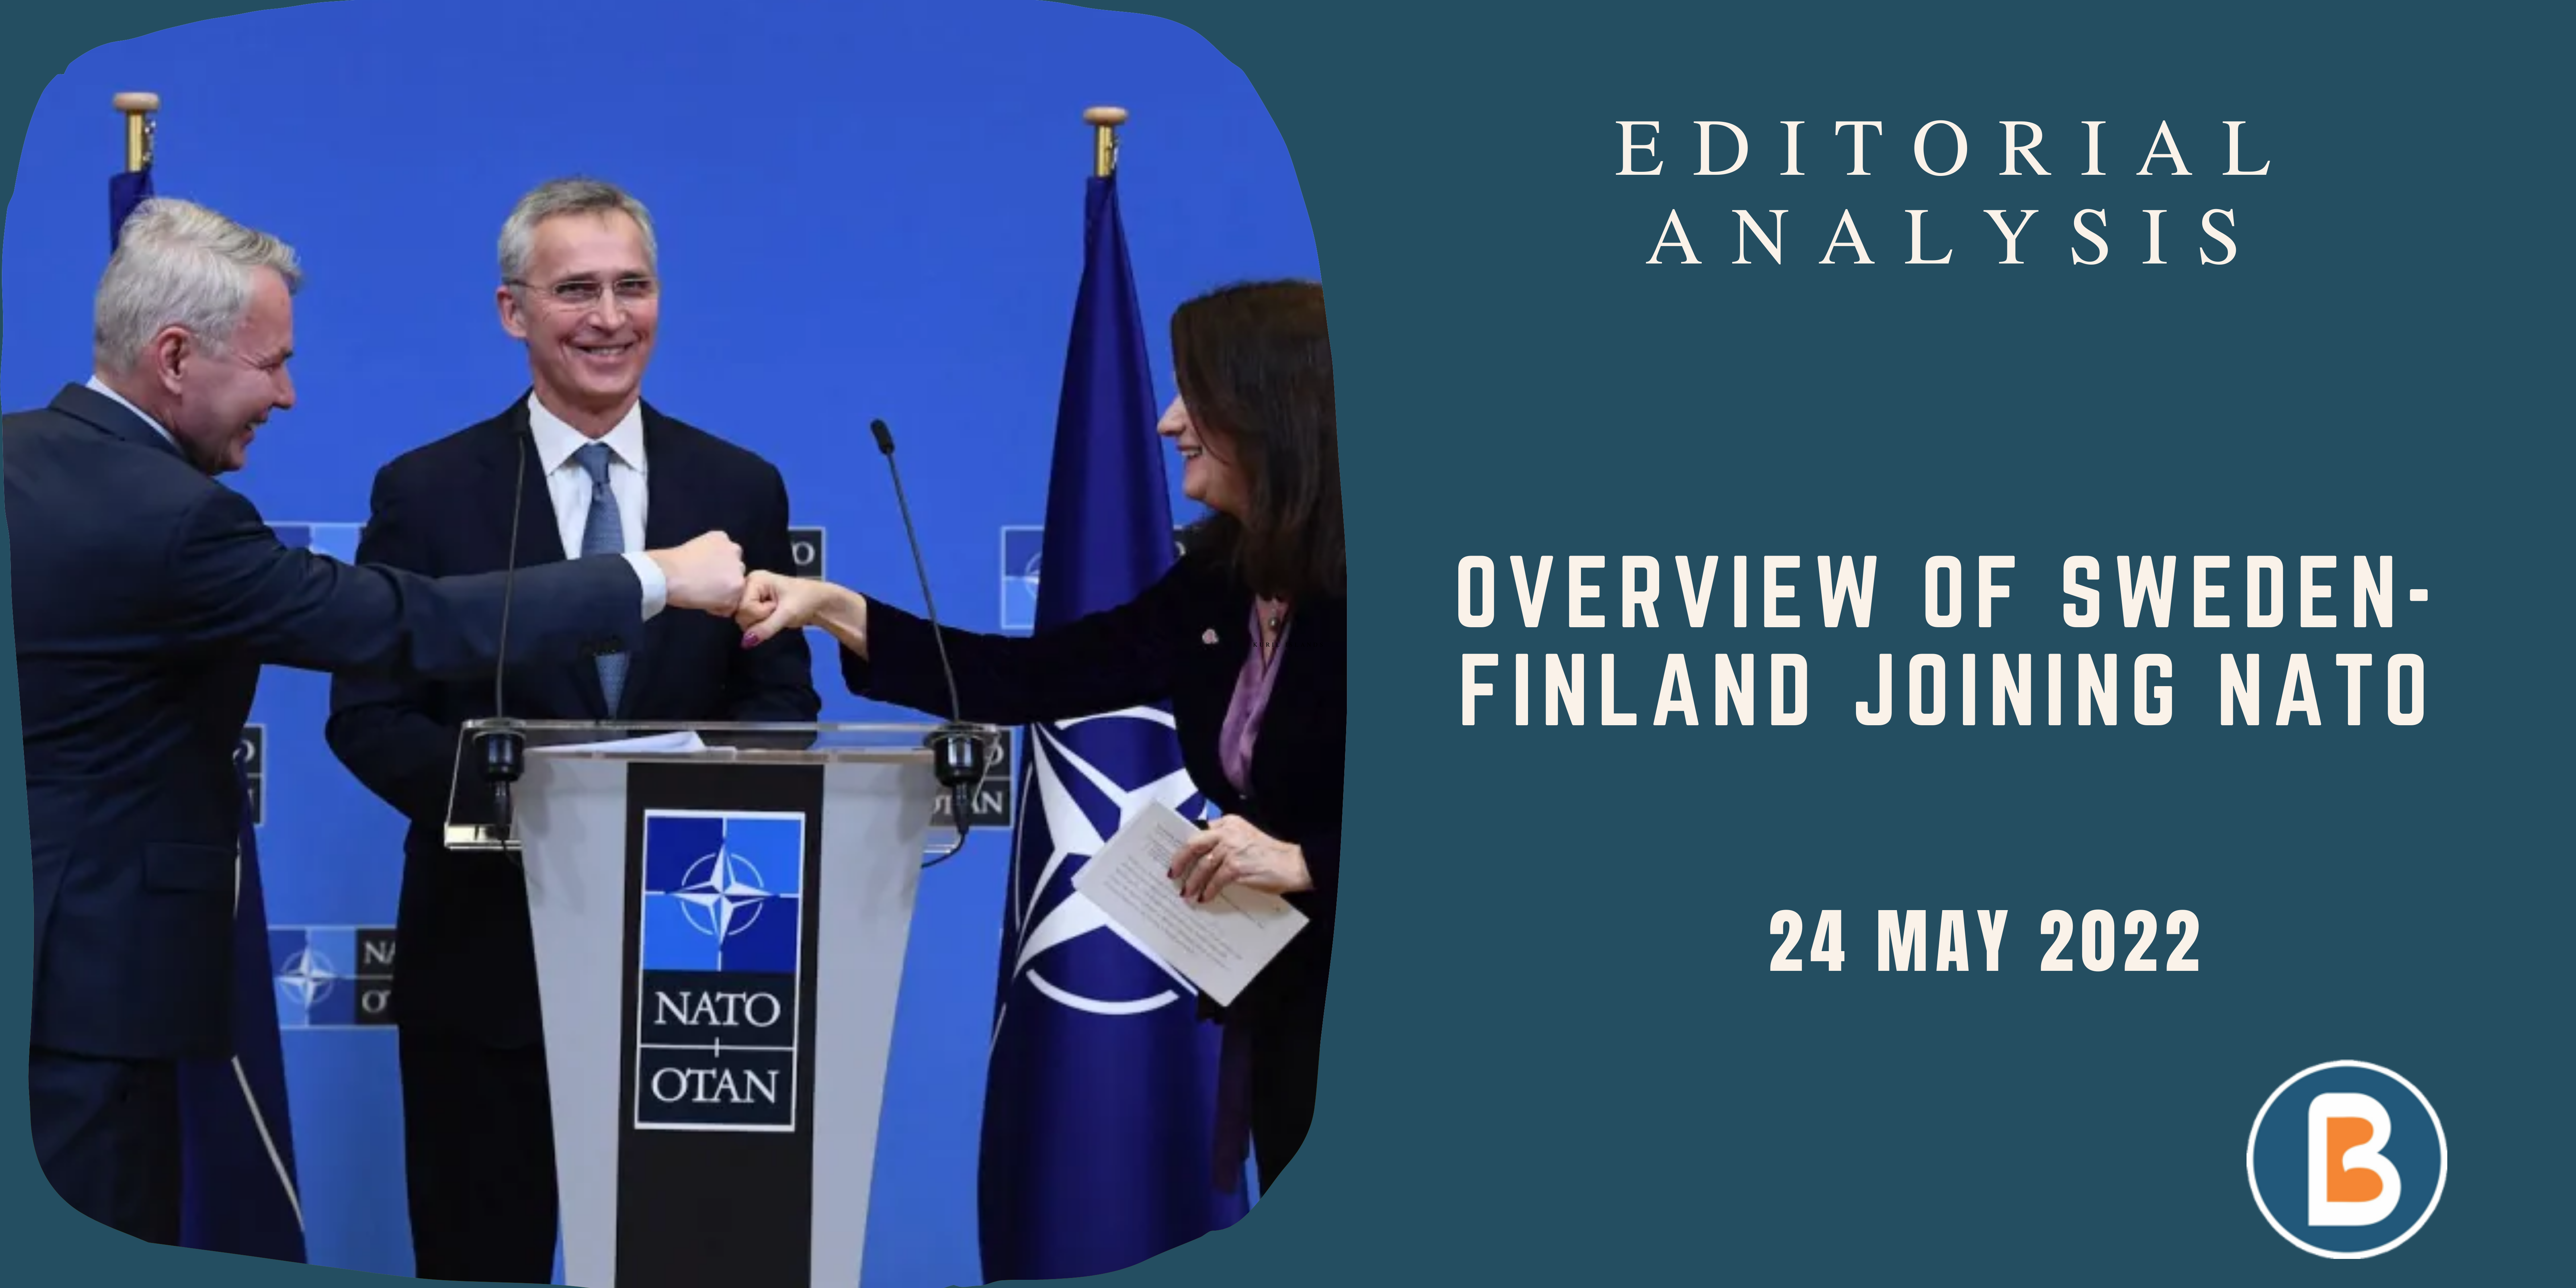 Editorial Analysis for IAS - Overview of Sweden-Finland Joining NATO